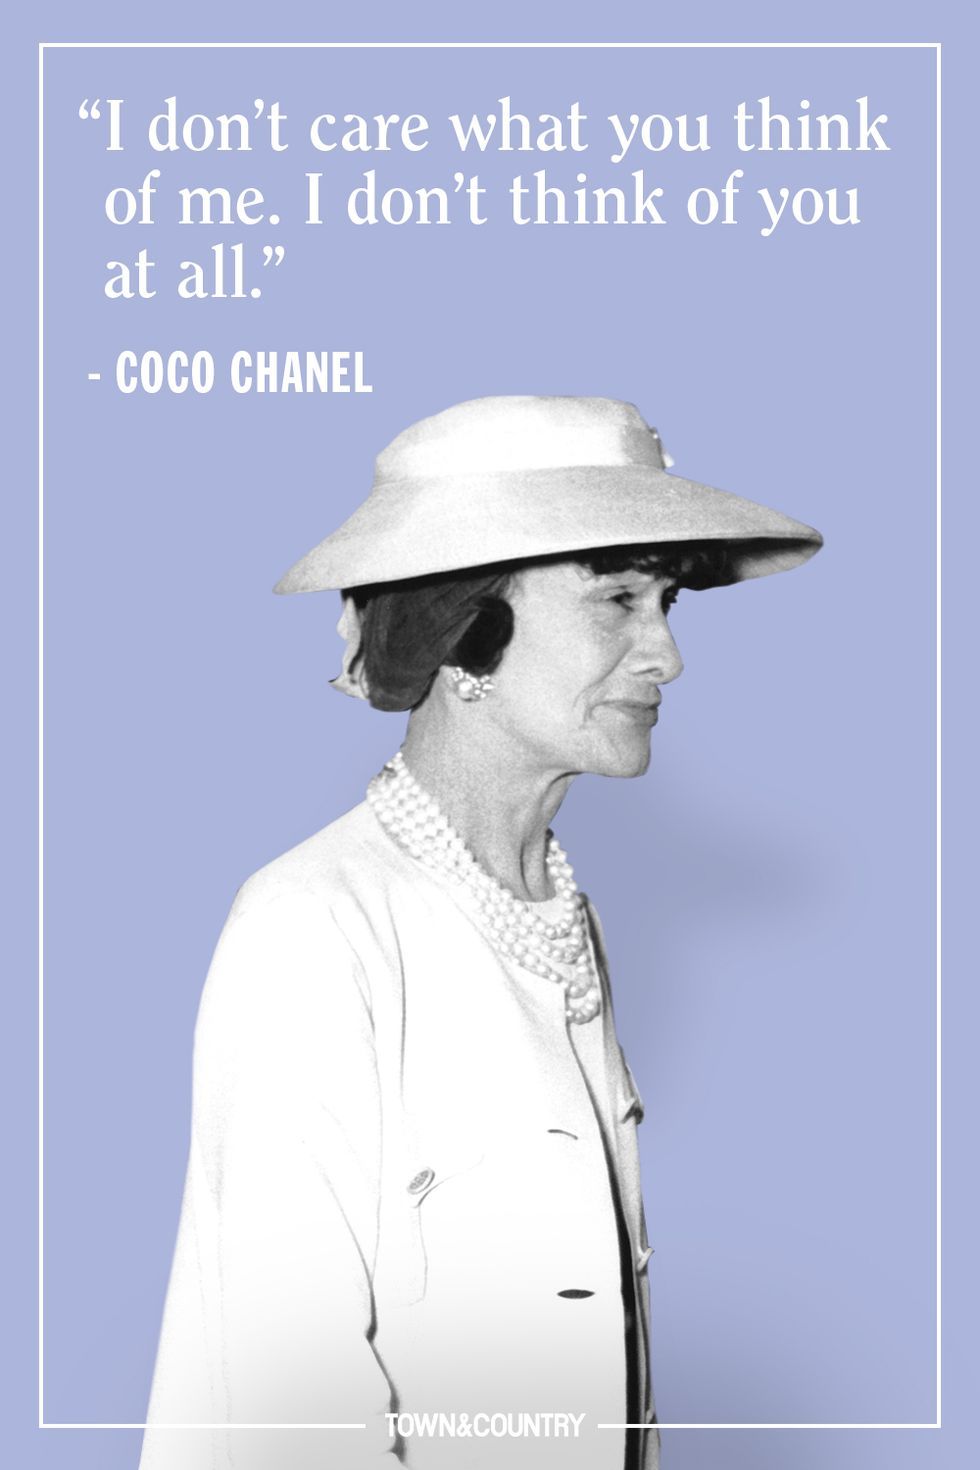 Let's stop with the cutesy Coco Chanel quotes on social media